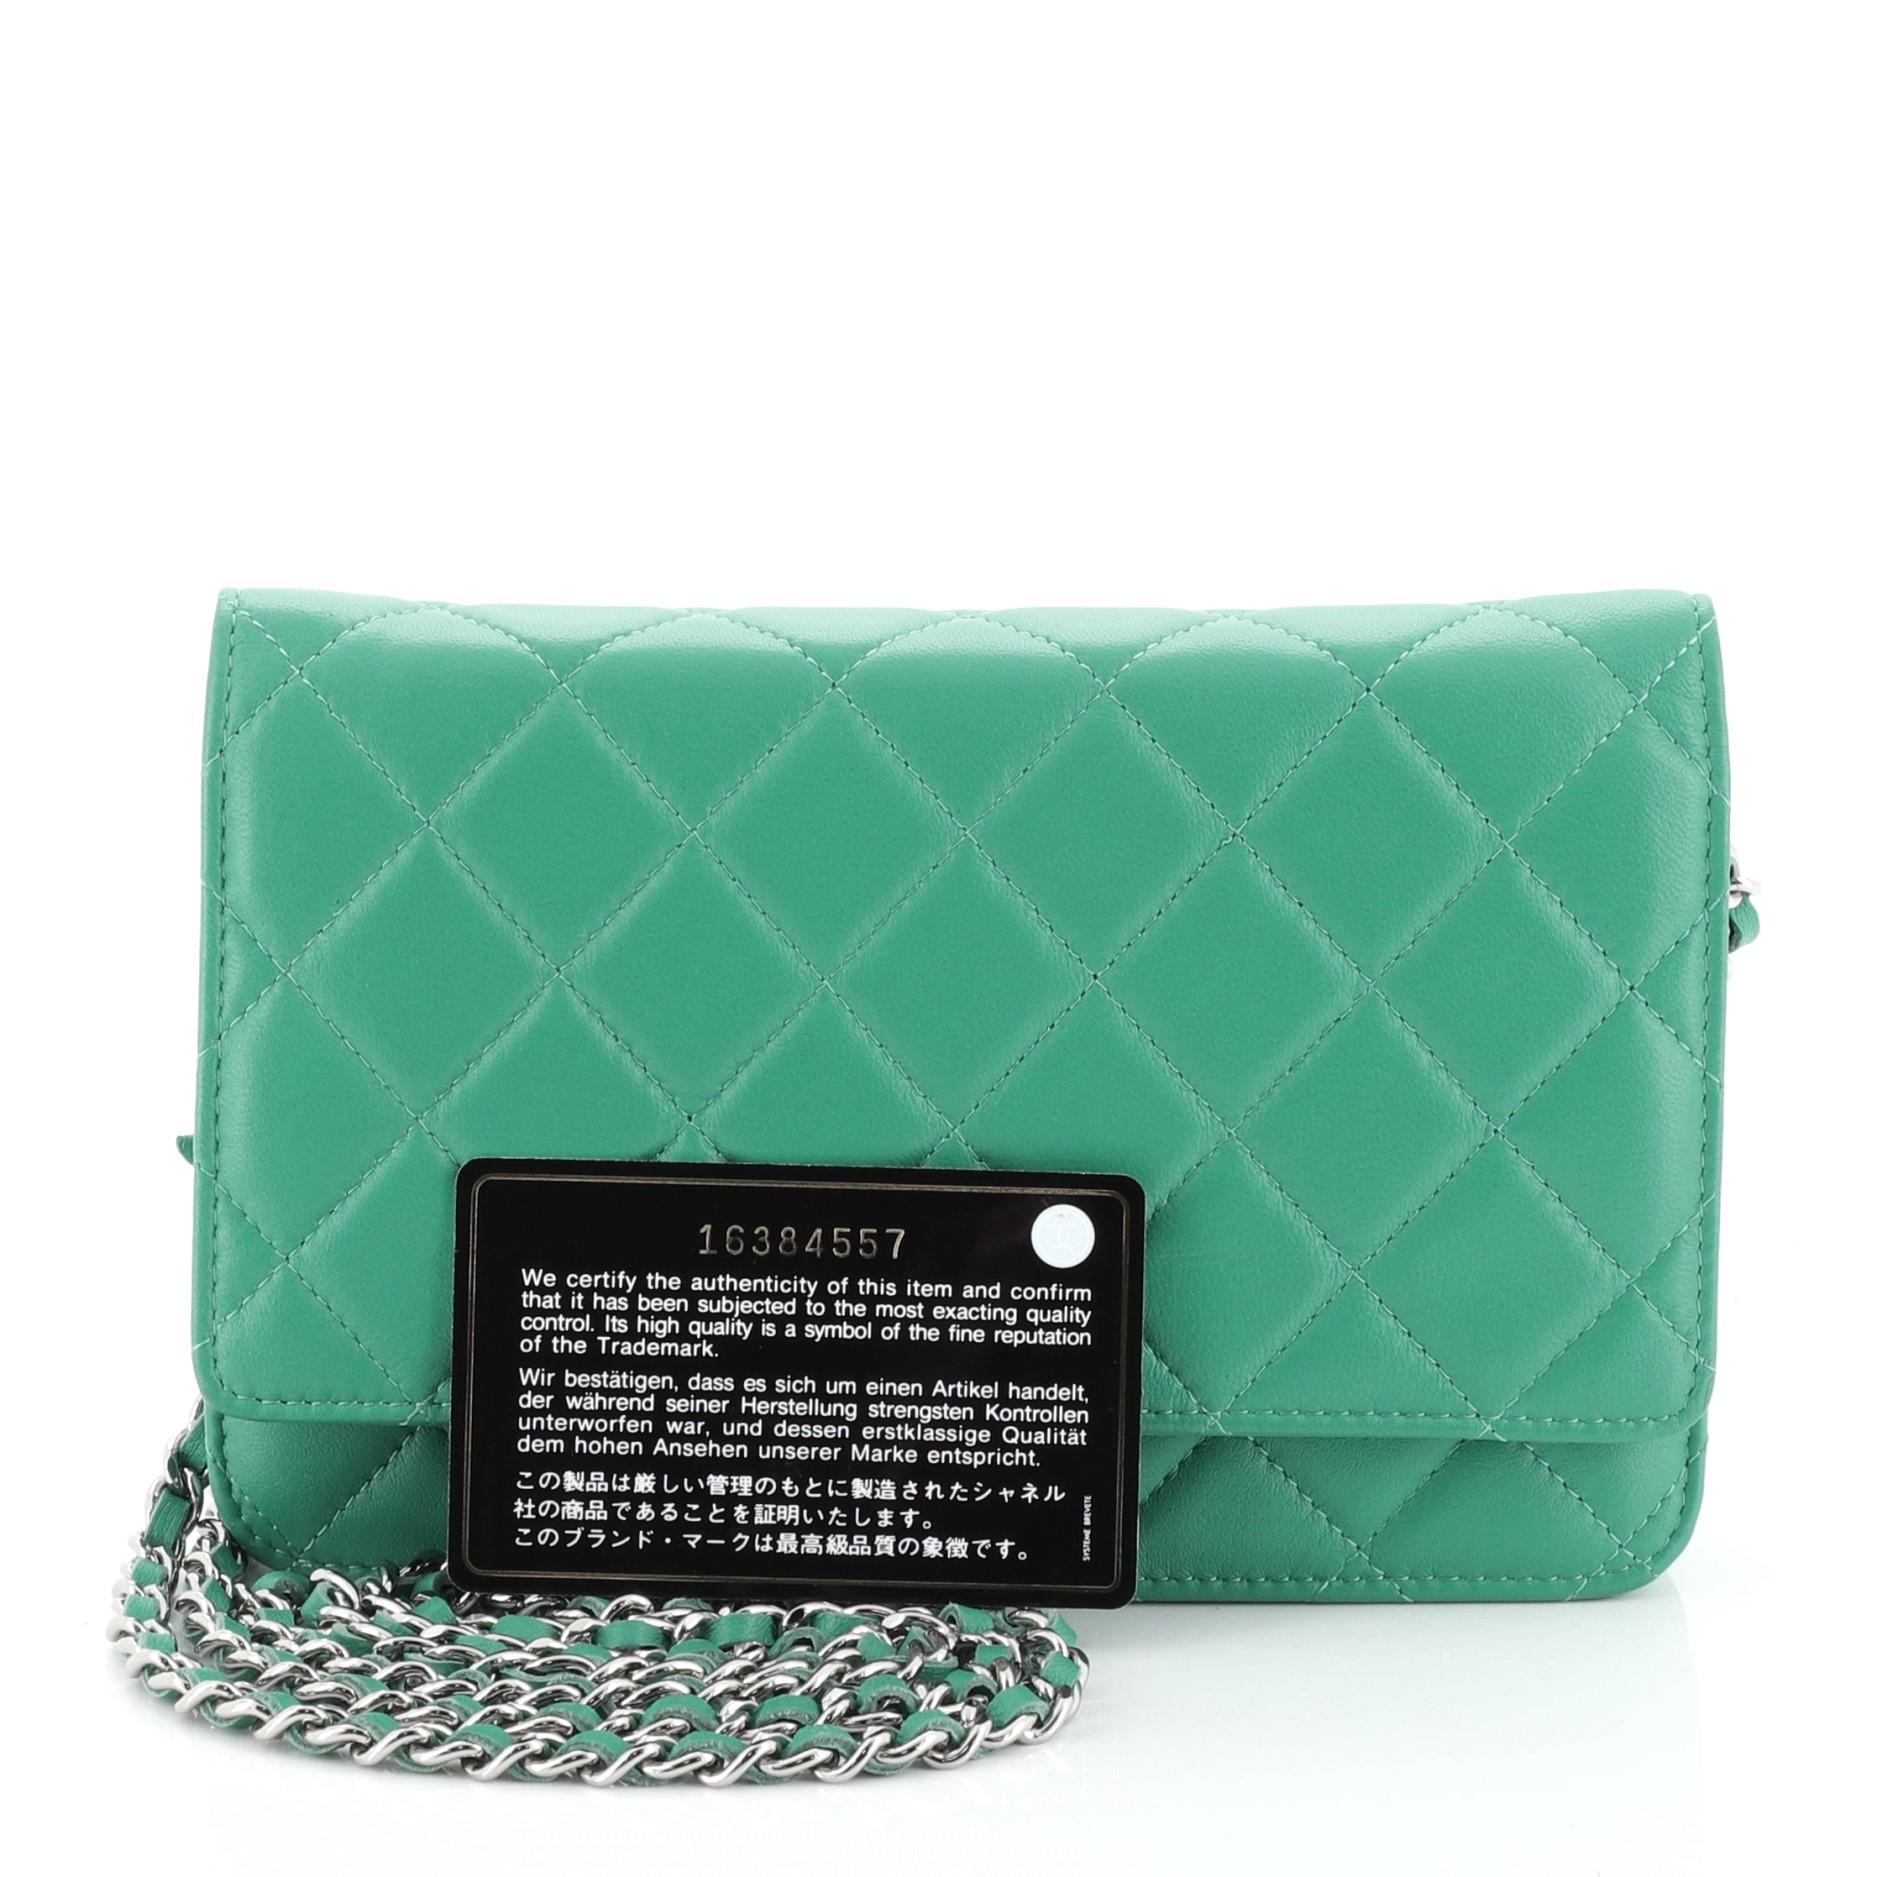 This Chanel Wallet on Chain Quilted Lambskin, crafted in green quilted lambskin leather, features woven-in leather chain strap, front flap with CC logo, exterior back slip pocket, and silver-tone hardware. Its magnetic snap button closure opens to a